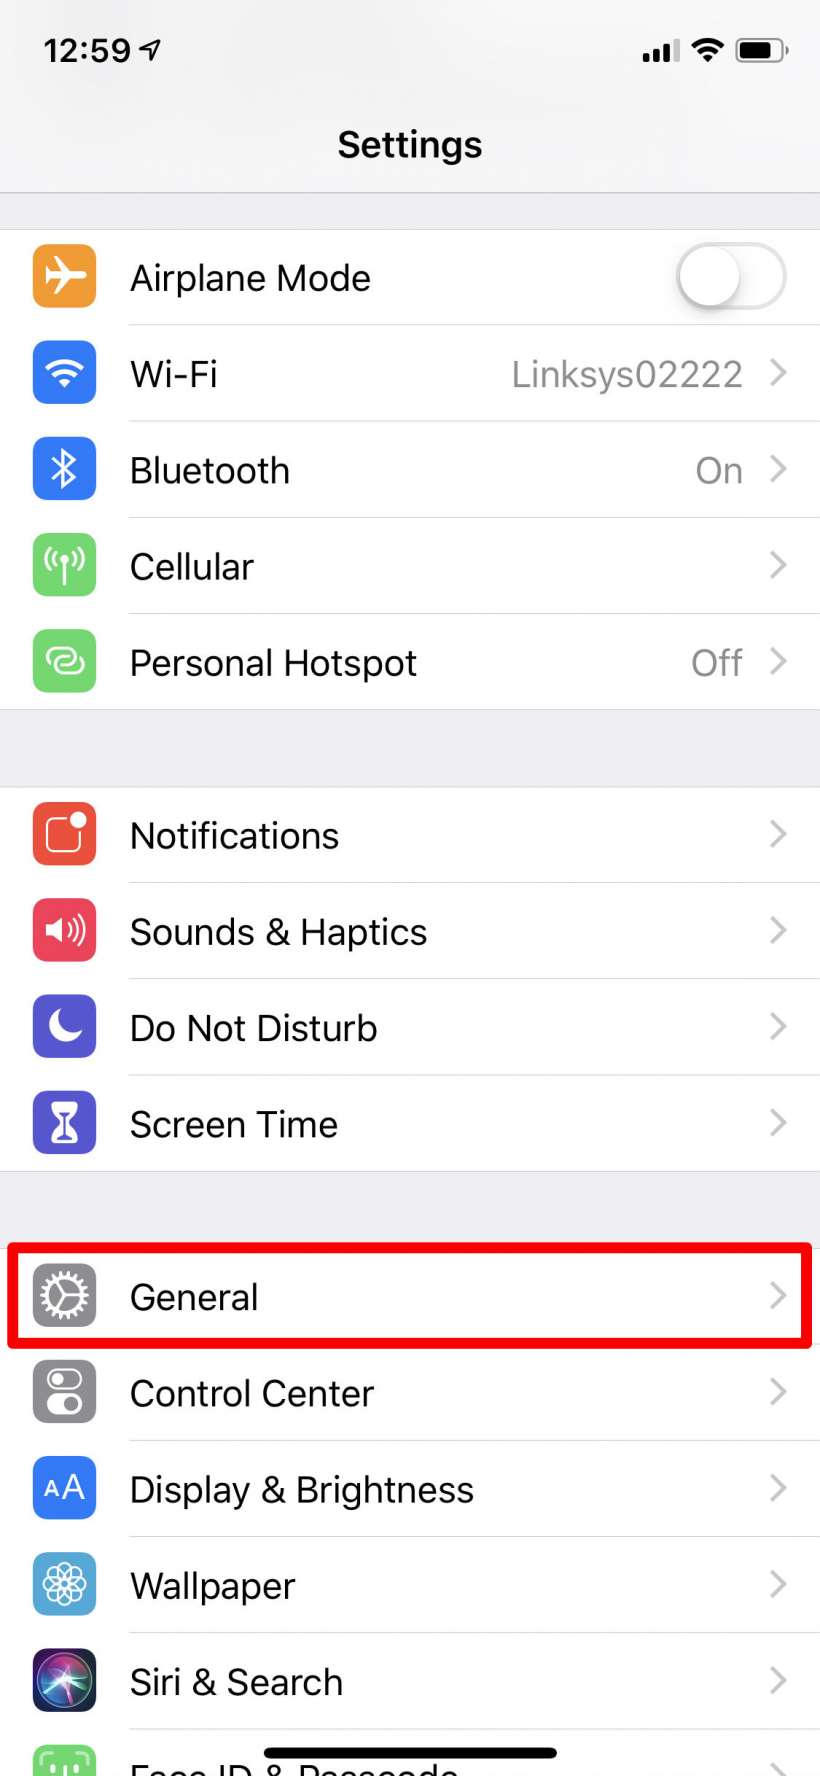 How to check your iPhone or iPad's warranty and AppleCare expiration in Settings